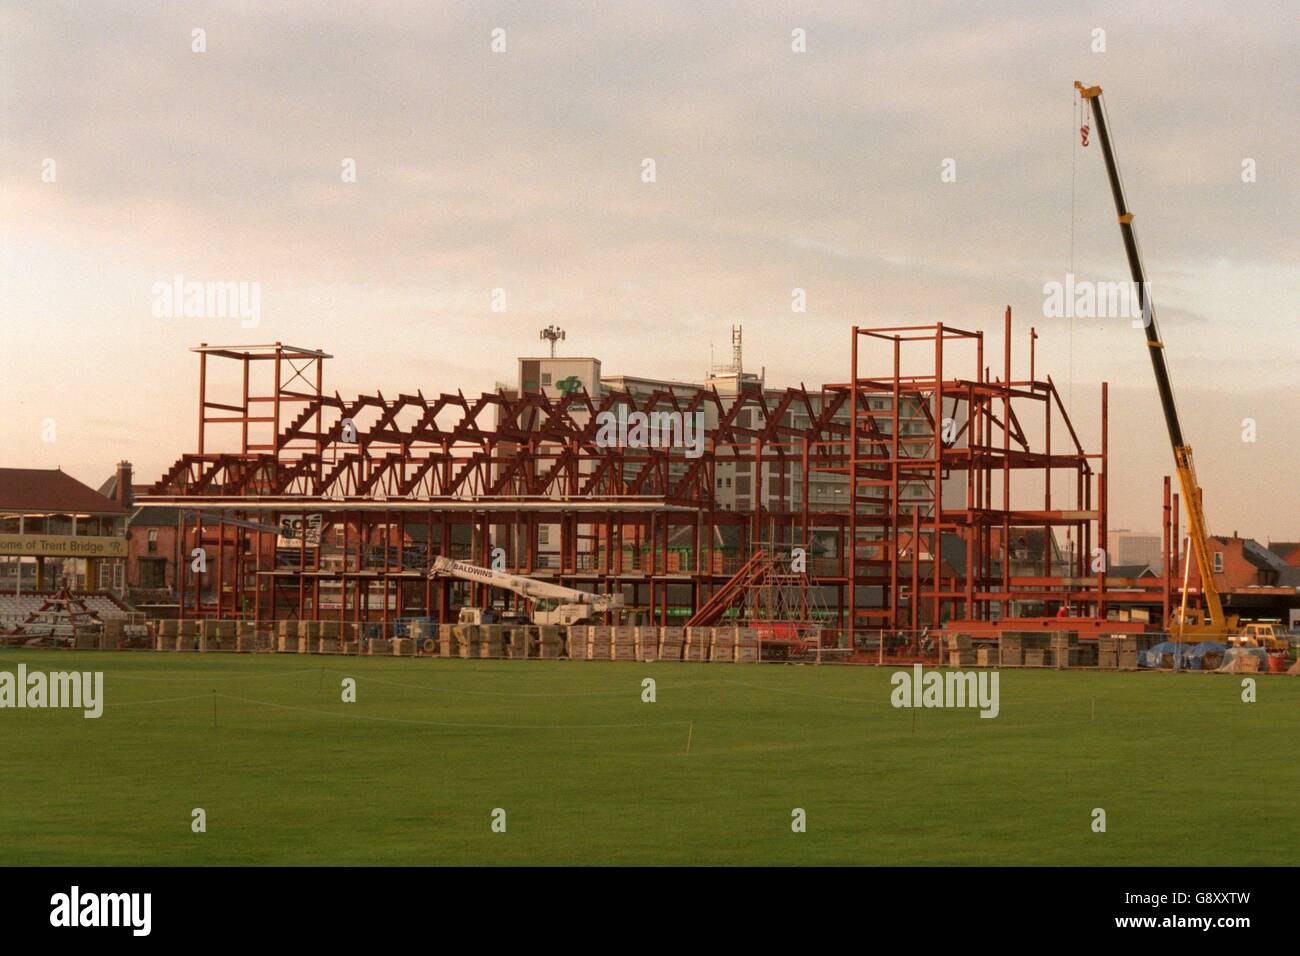 Cricket - New Stand Under Construction at Trent Bridge, Nottinghamshire County Cricket Club. A view of the new stand at Trent Bridge Stock Photo